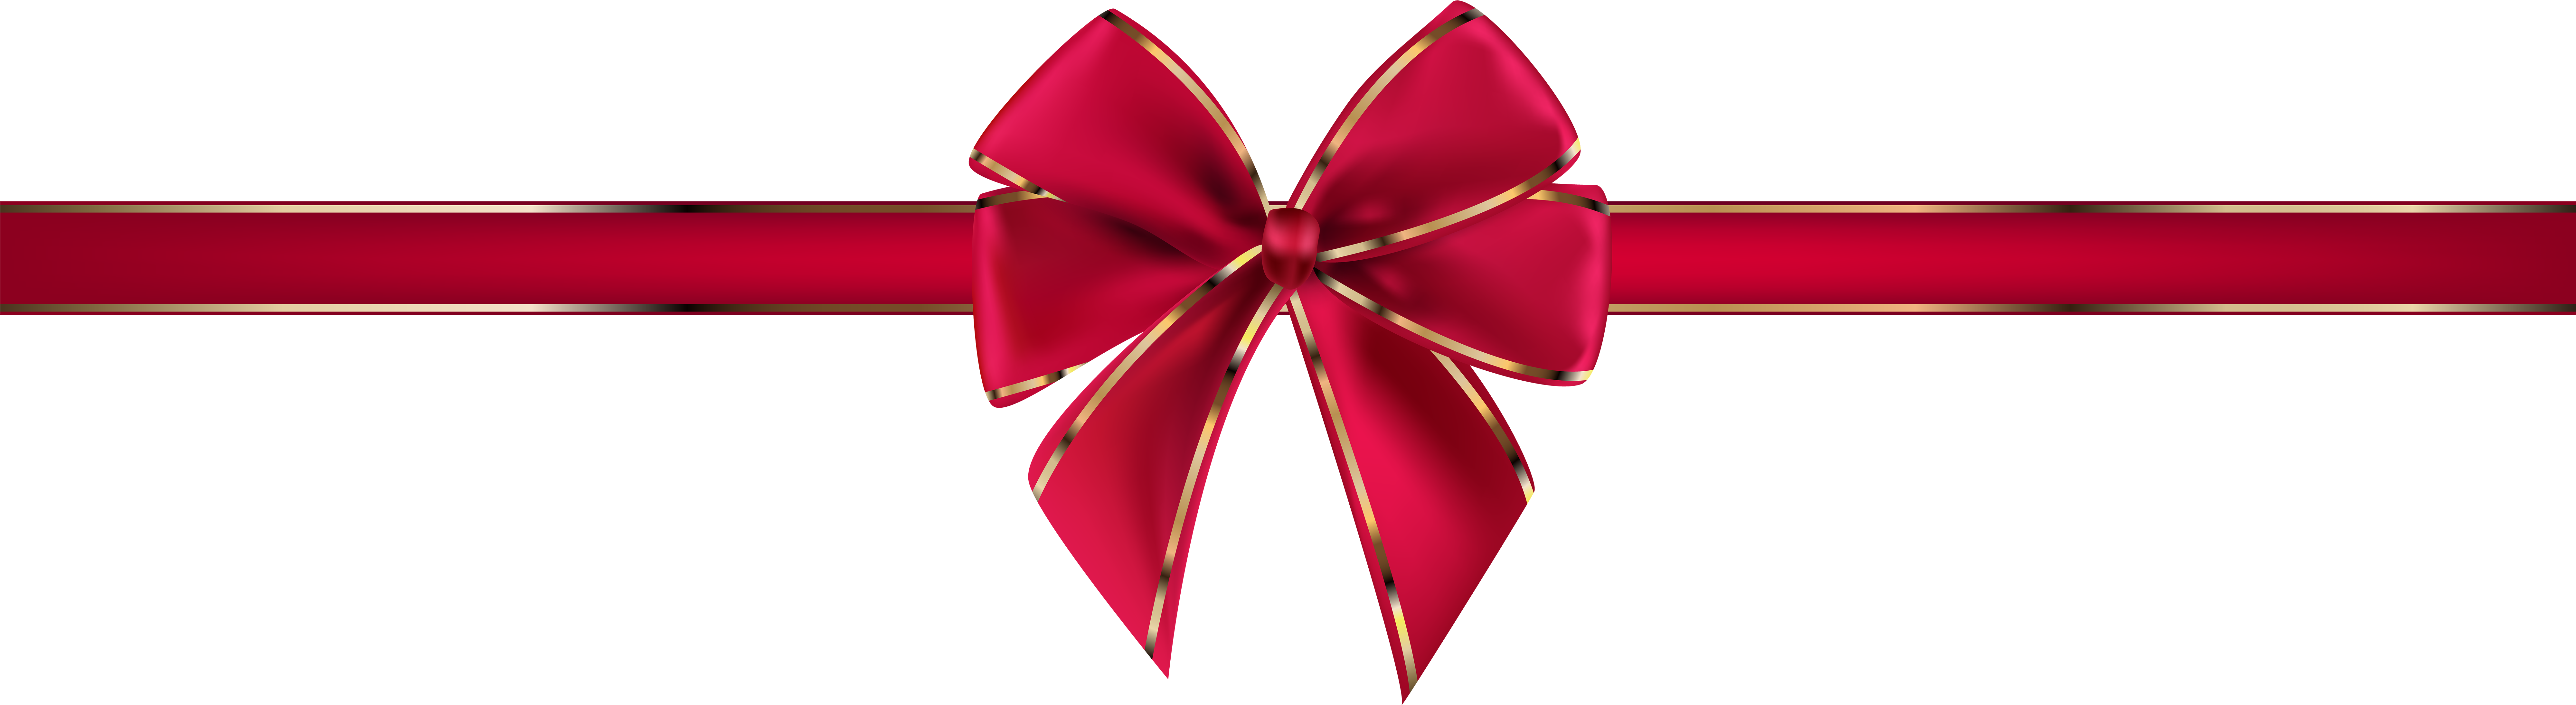 Beautiful Bow Png Clip Art Image Gift Bow